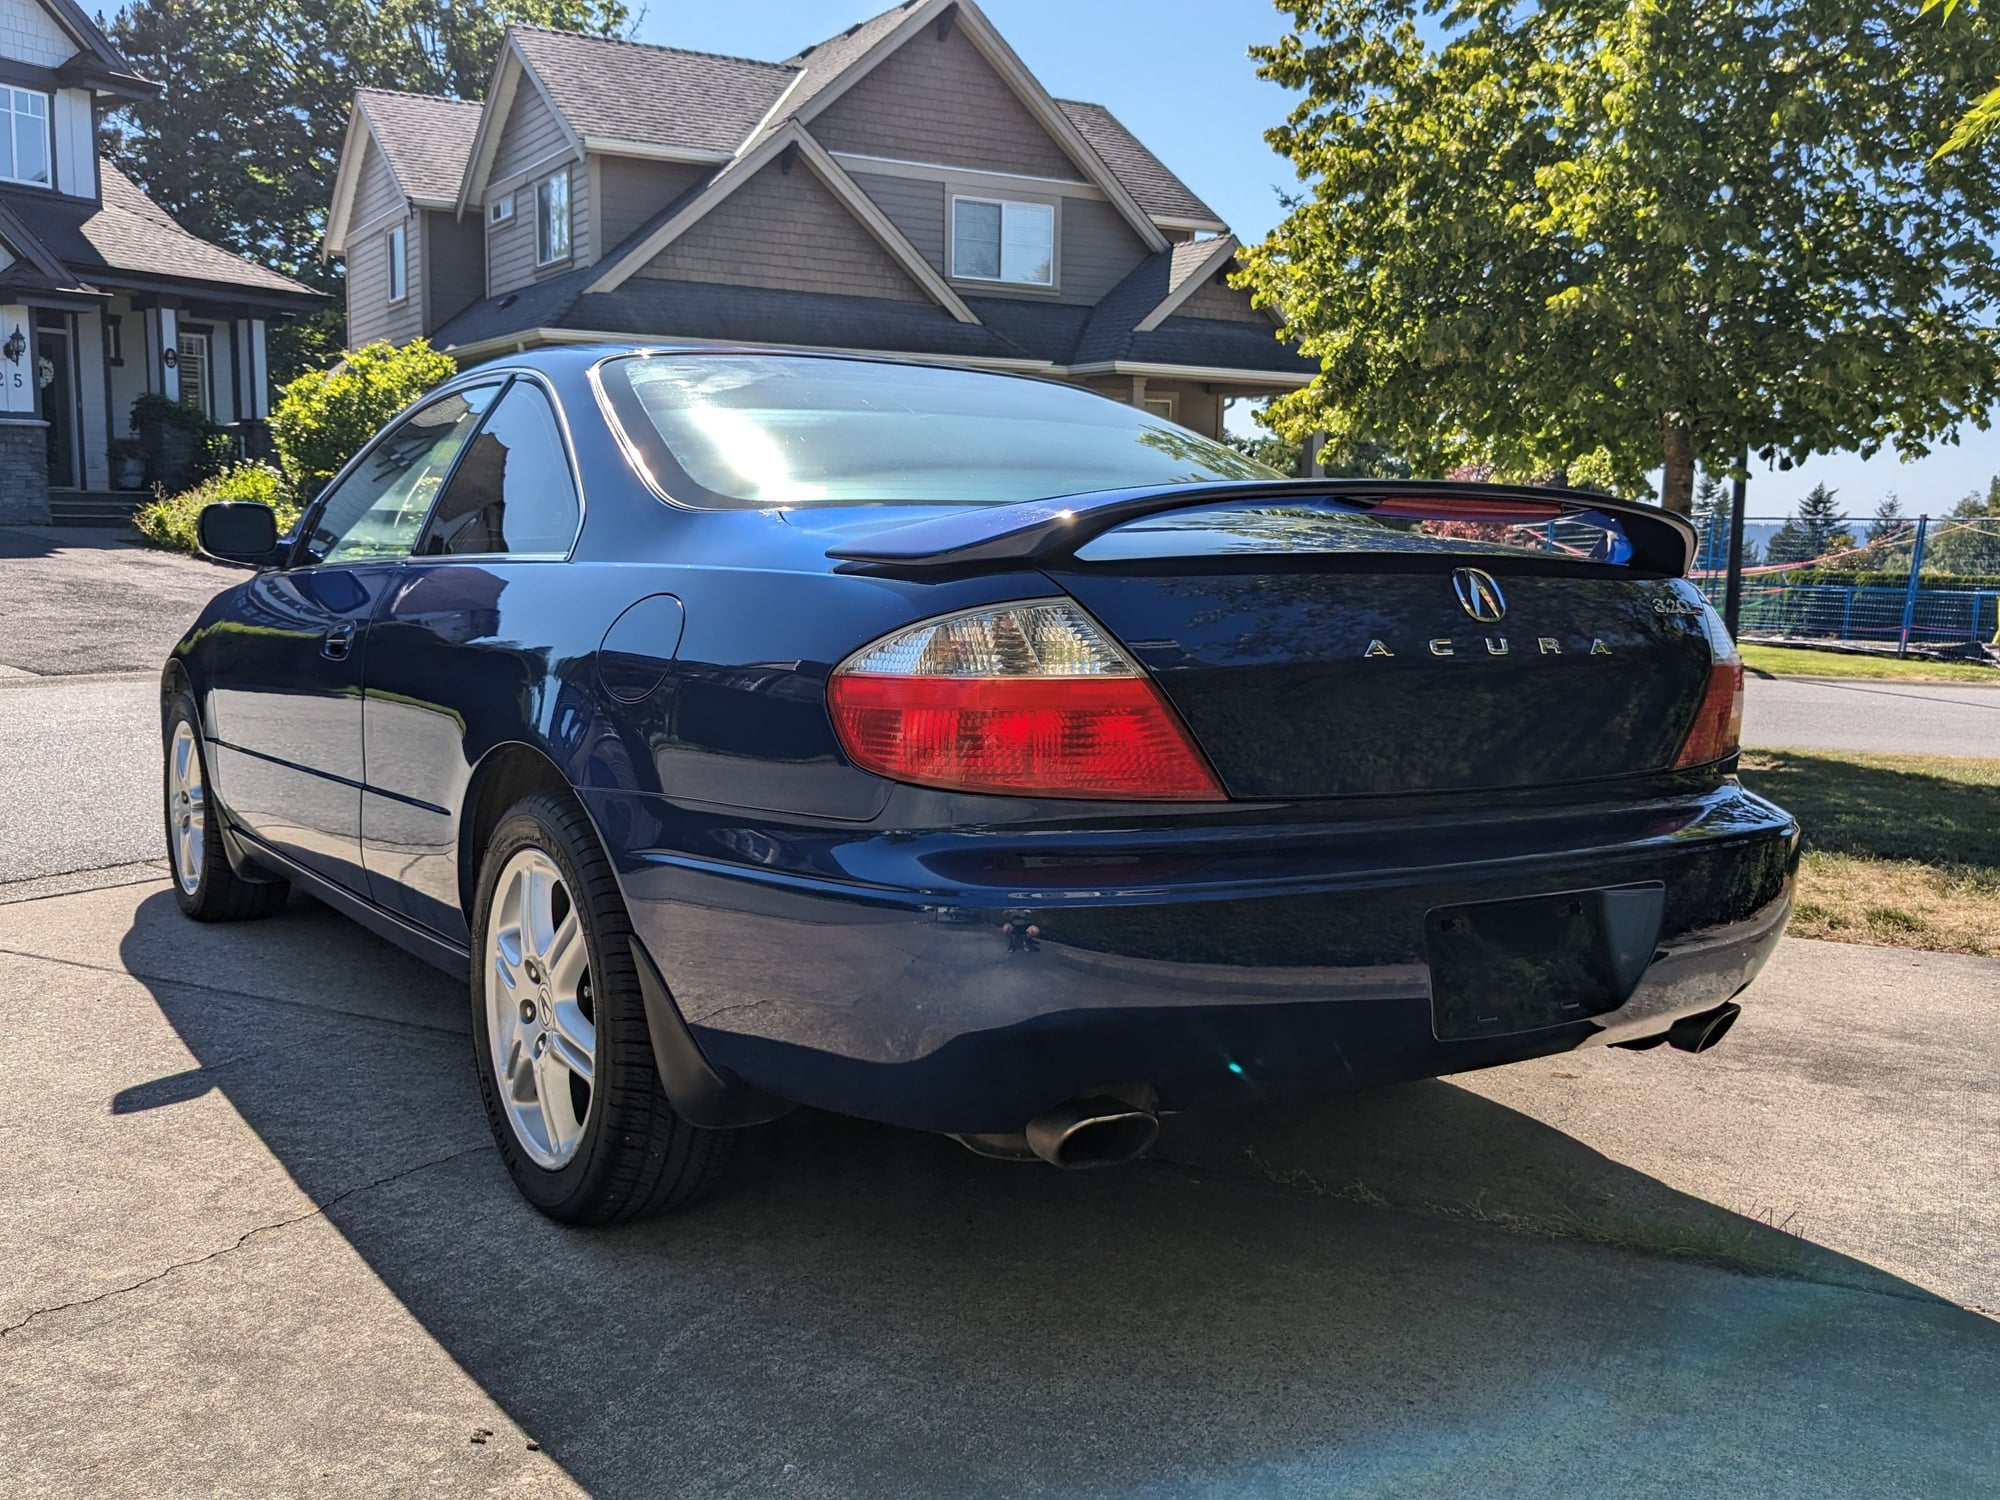 2003 Acura CL - FS: Unicorn Type S Aegean Blue 6 speed MT - Used - VIN 19UYA41653A800691 - 6 cyl - 2WD - Manual - Coupe - Blue - Abbotsford, BC V3G0A7, Canada